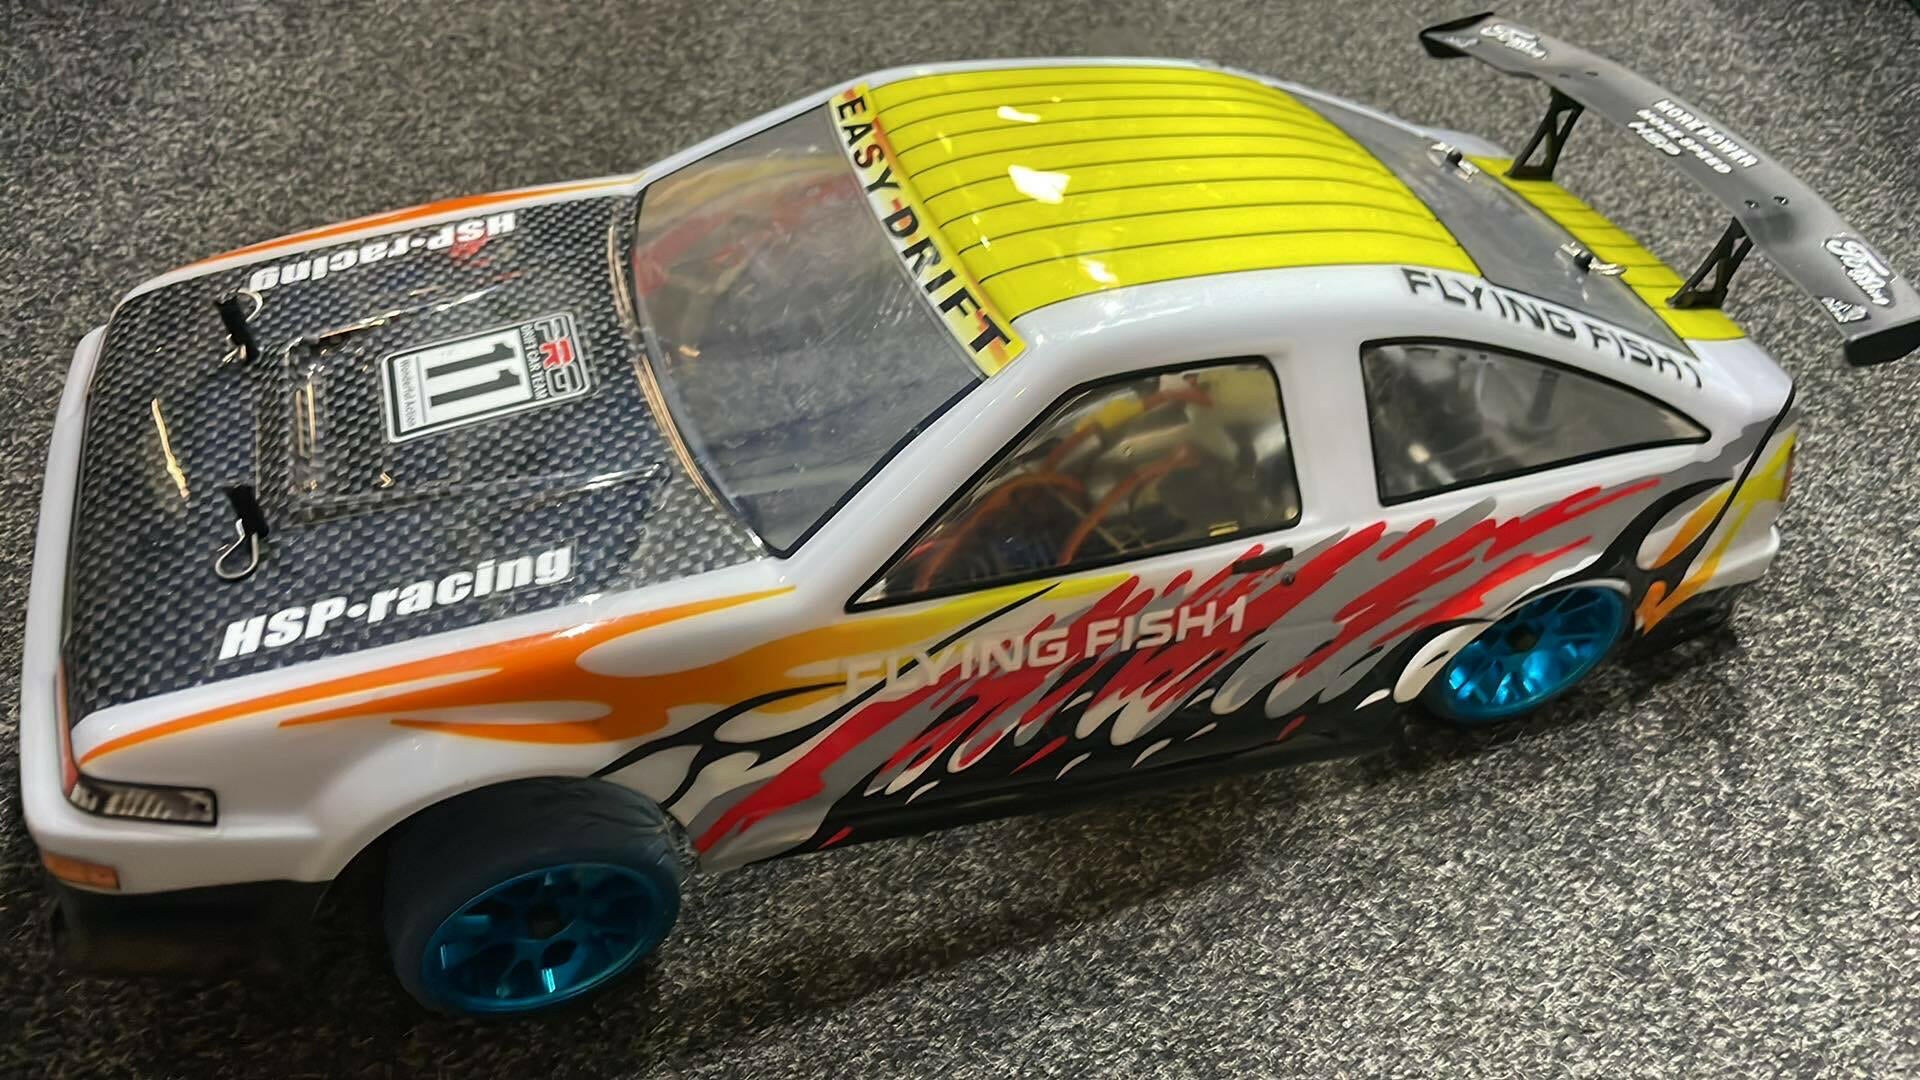 Flying Fish RC Car with Spares.